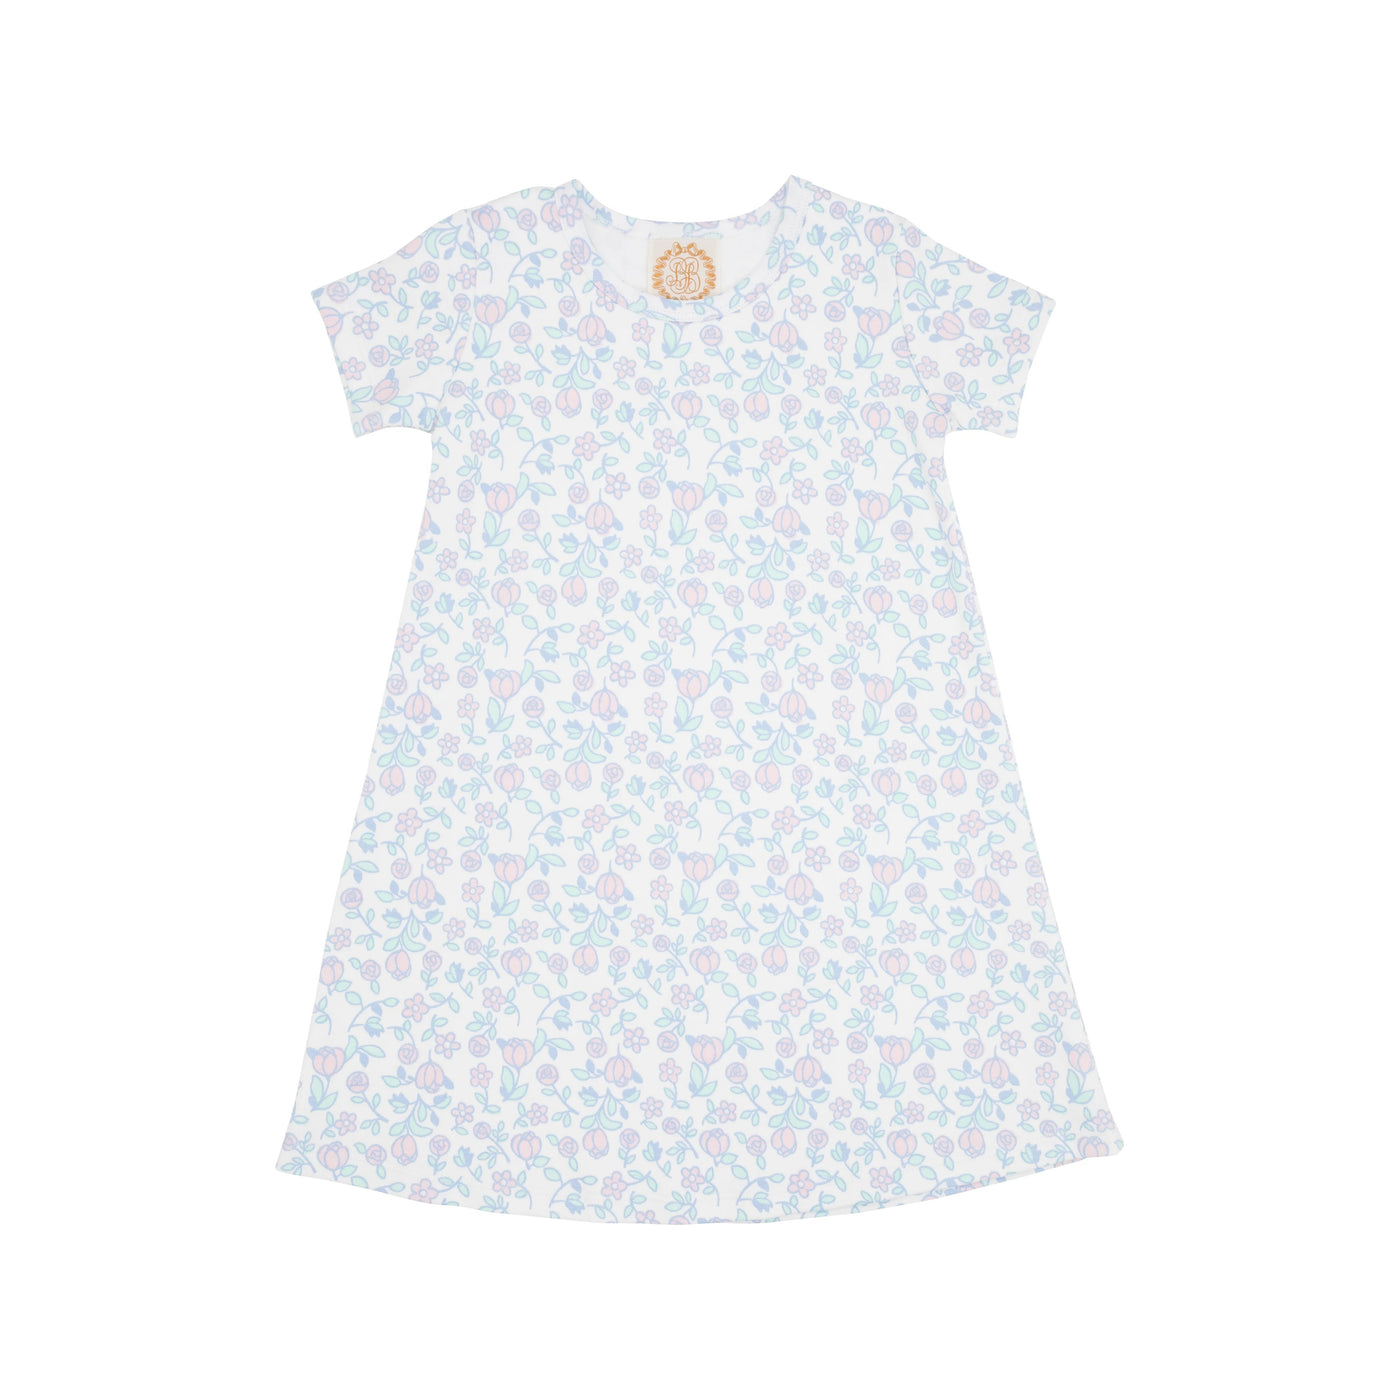 Polly Play Dress - Posies And Peonies